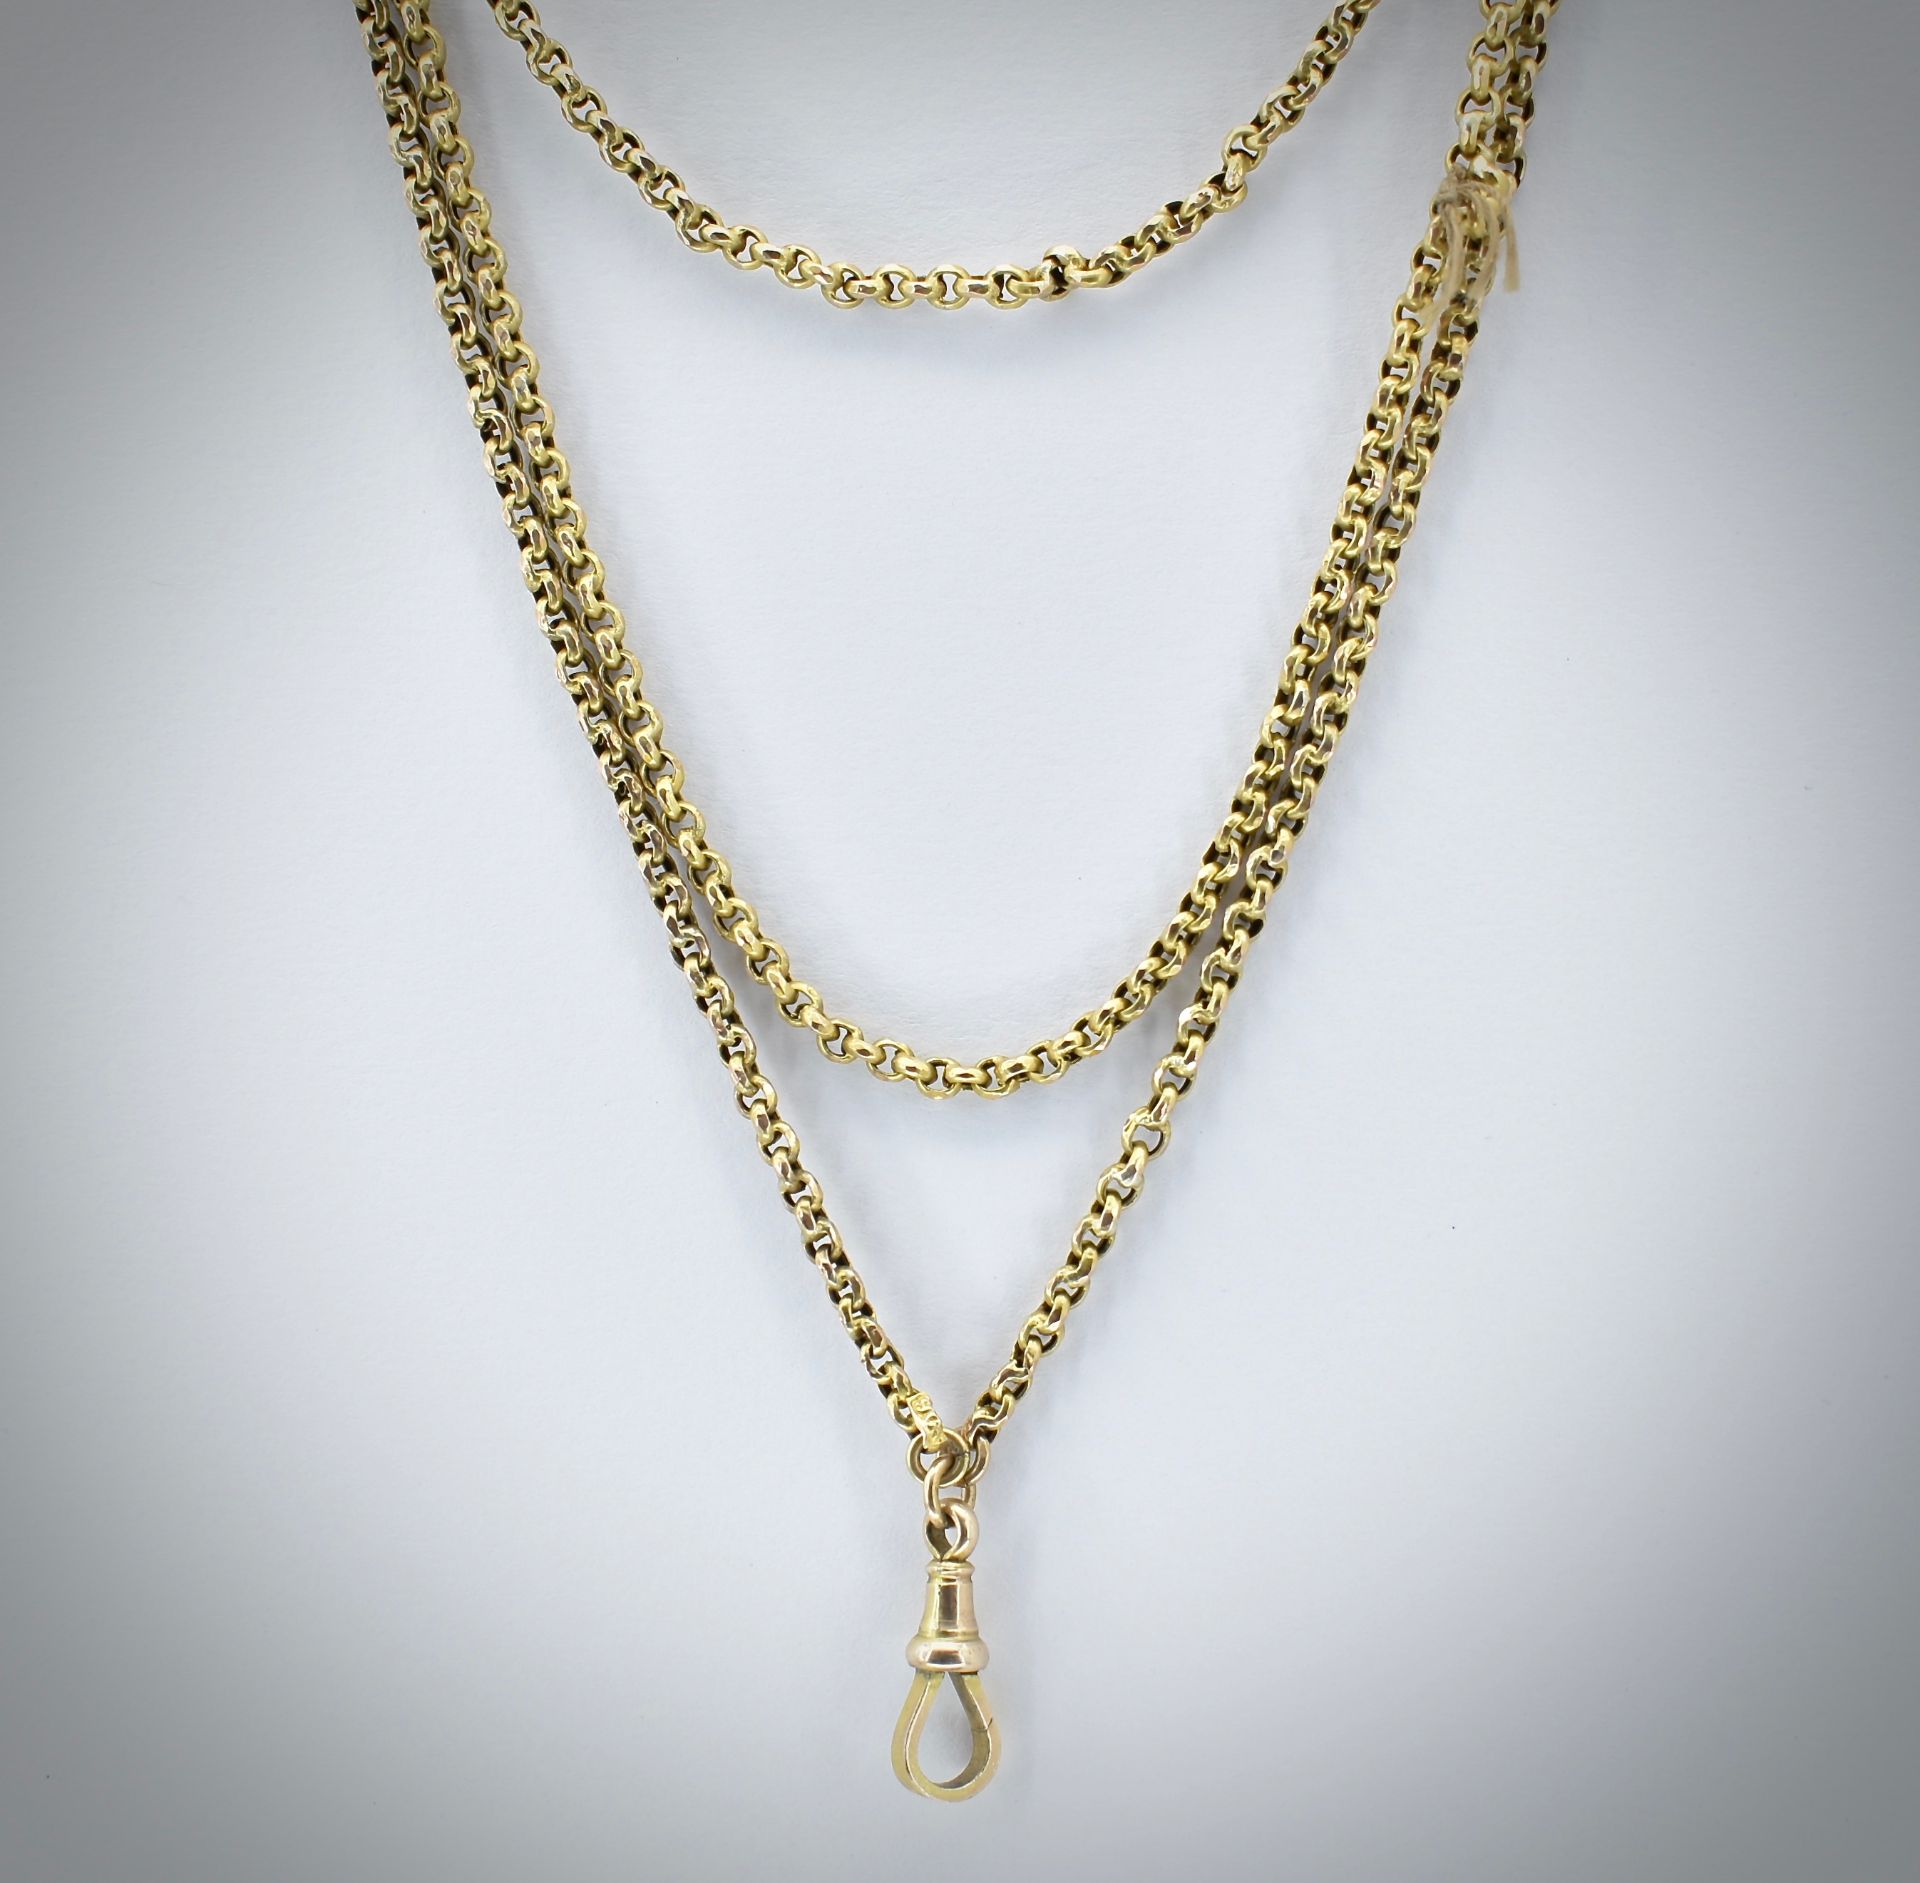 Victorian 19th Century 9ct Gold Guard Chain - Image 2 of 2